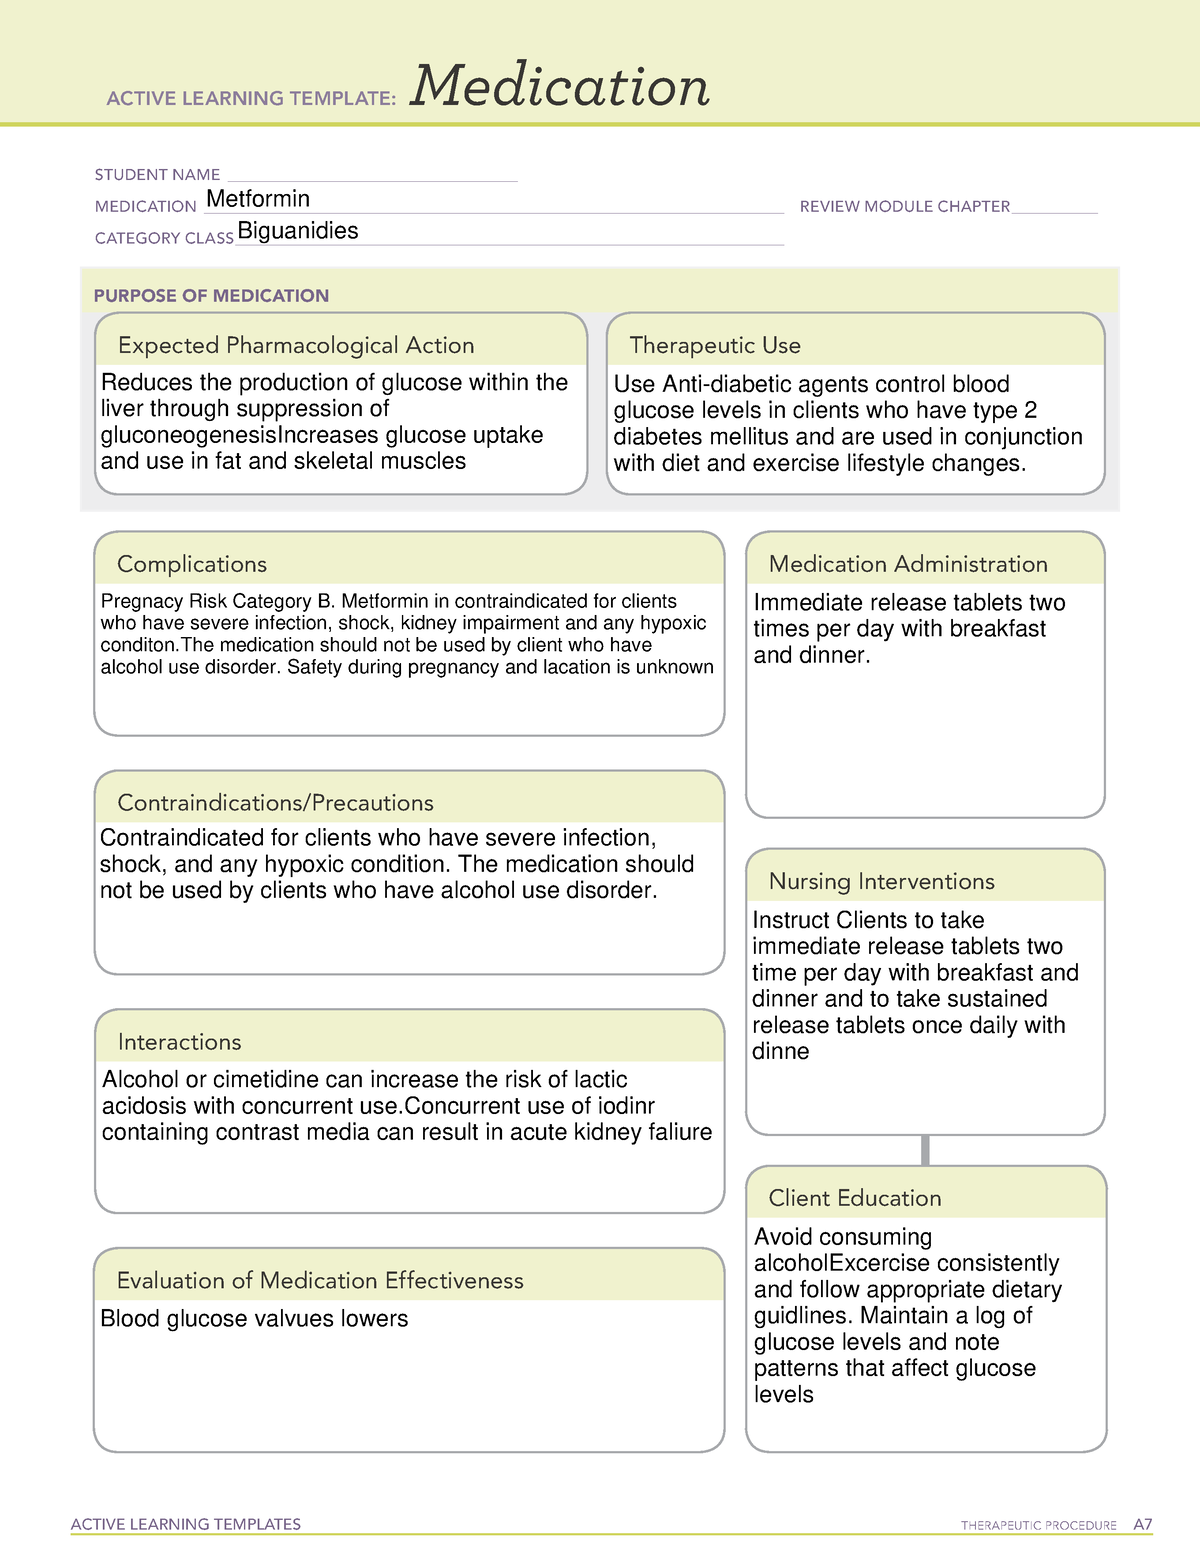 metformin-medication-template-active-learning-templates-therapeutic